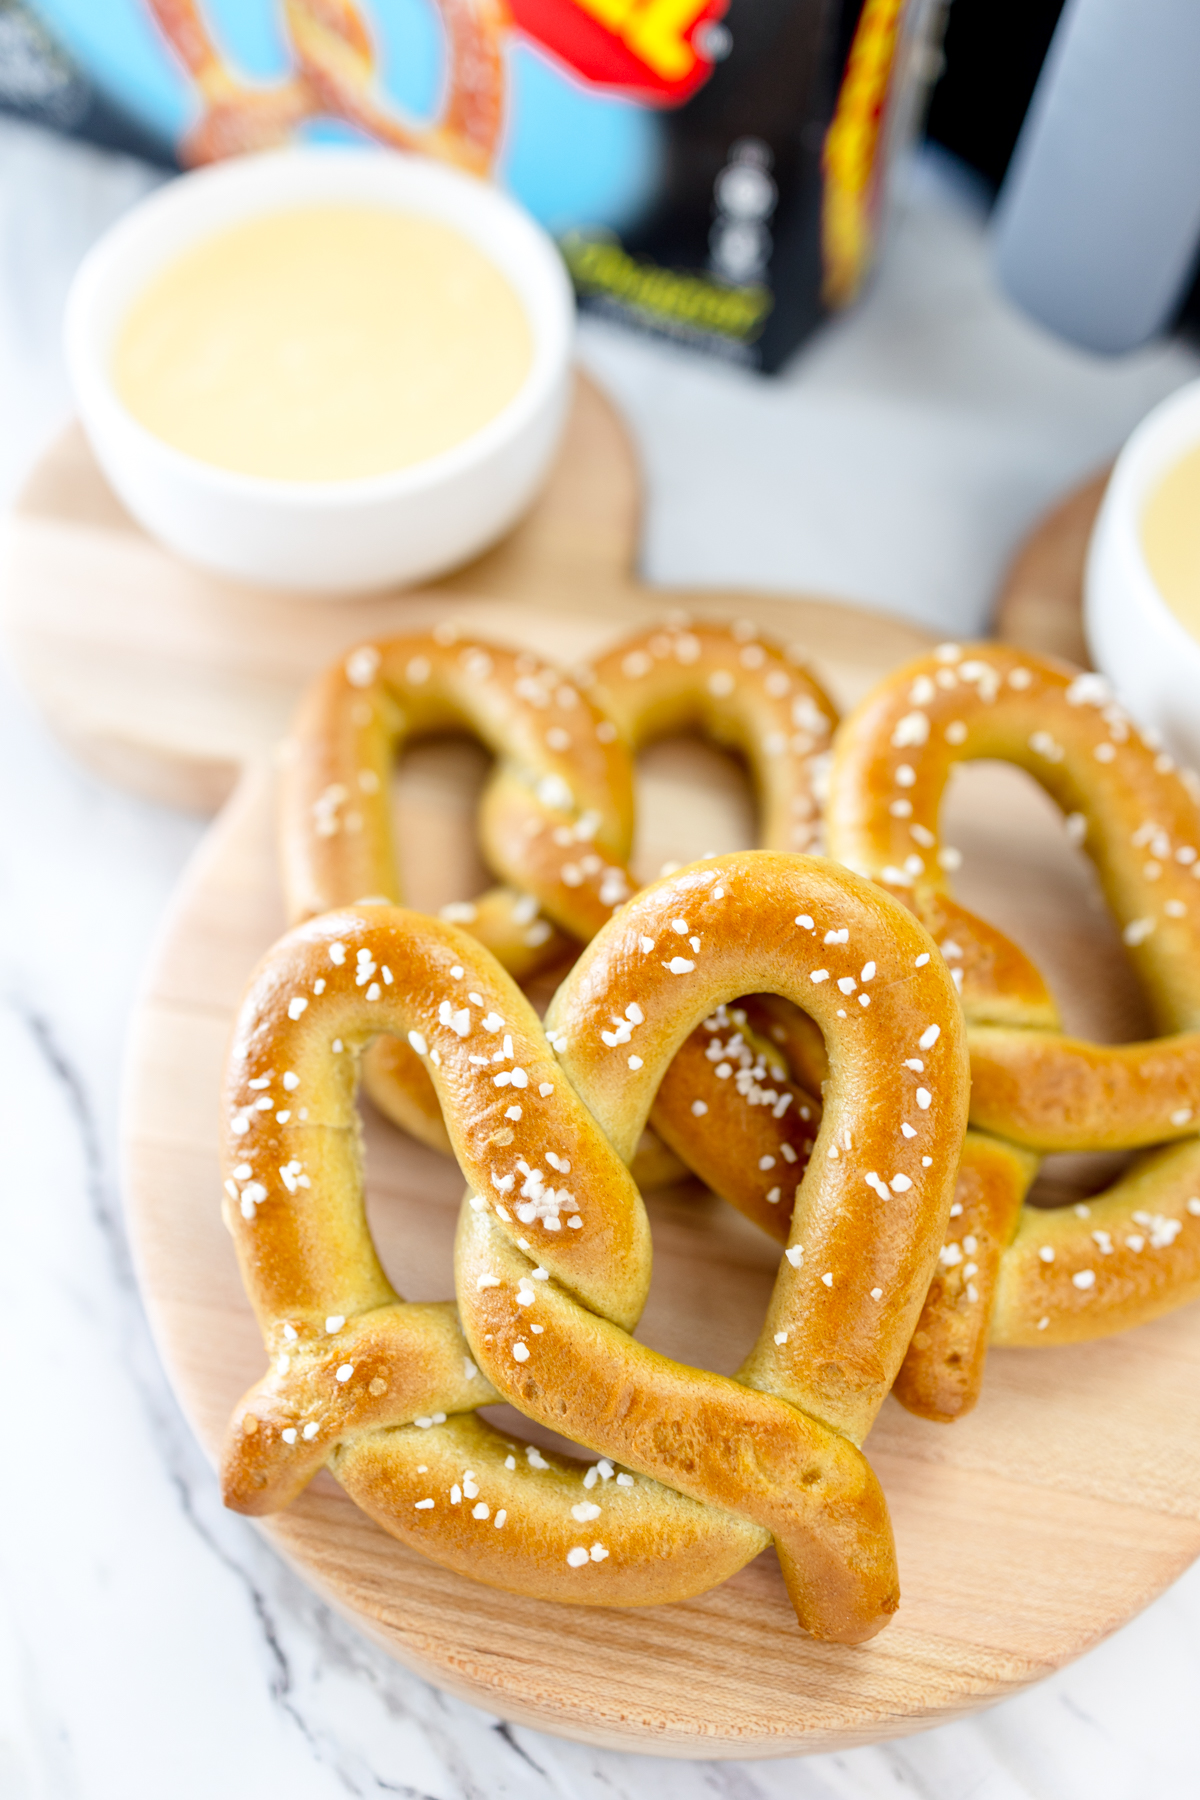 Air-fried pretzels on a serving board with a ramekin of sauce in the background.